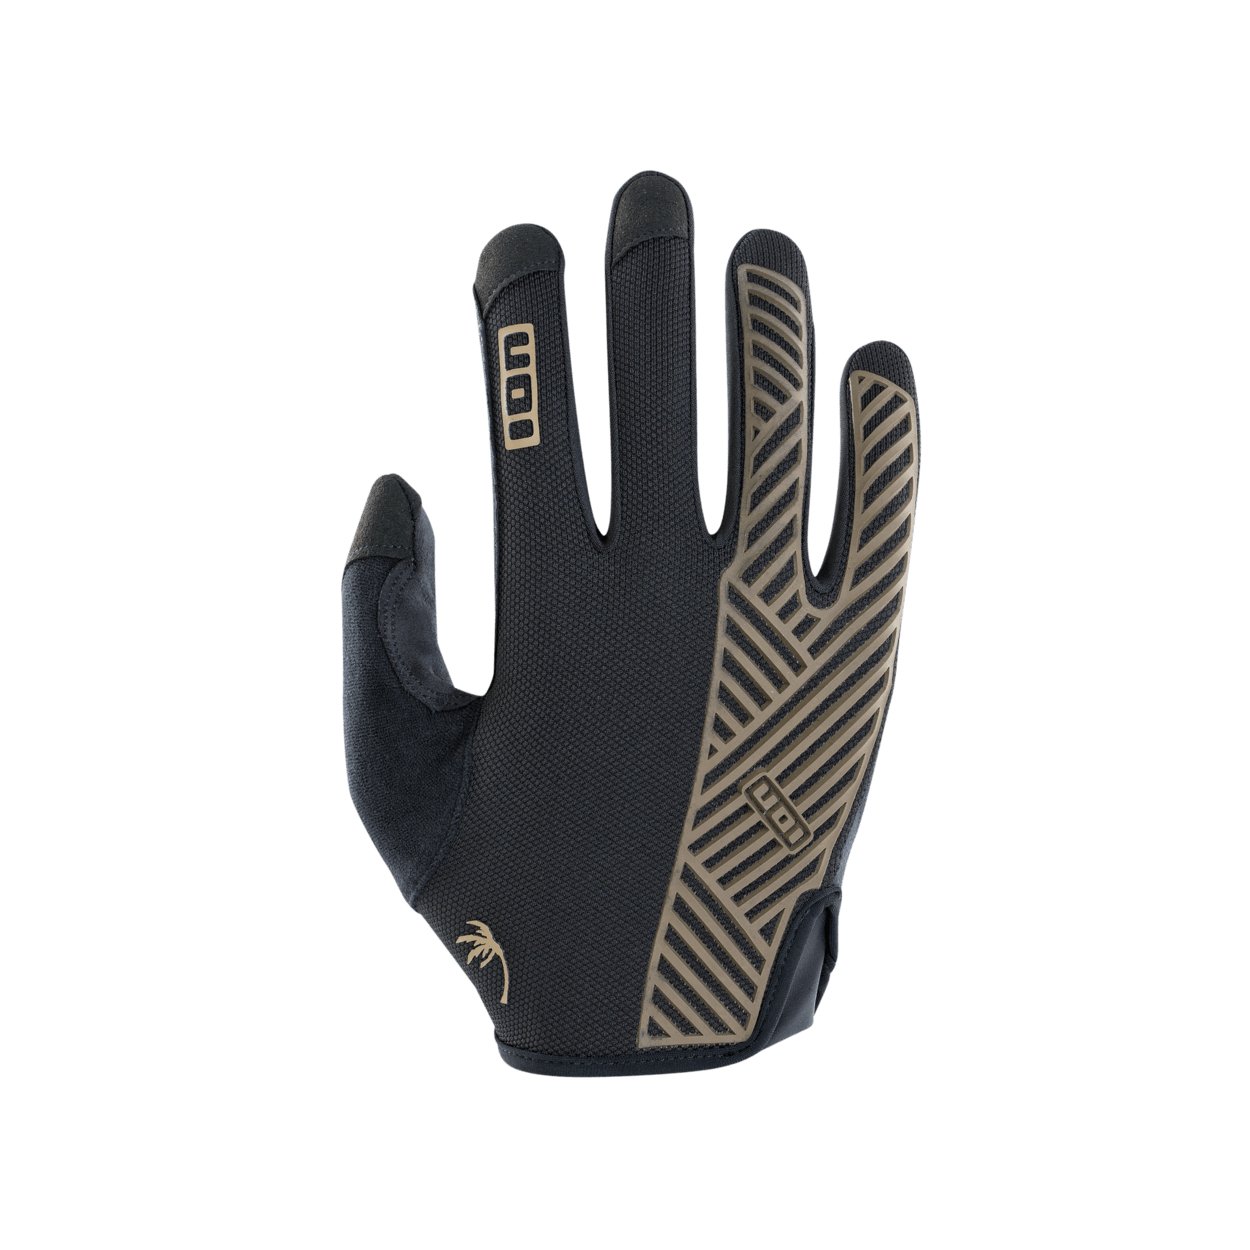 ION MTB Gloves Scrub Select 2024 - Worthing Watersports - 9010583029771 - Gloves - ION Bike